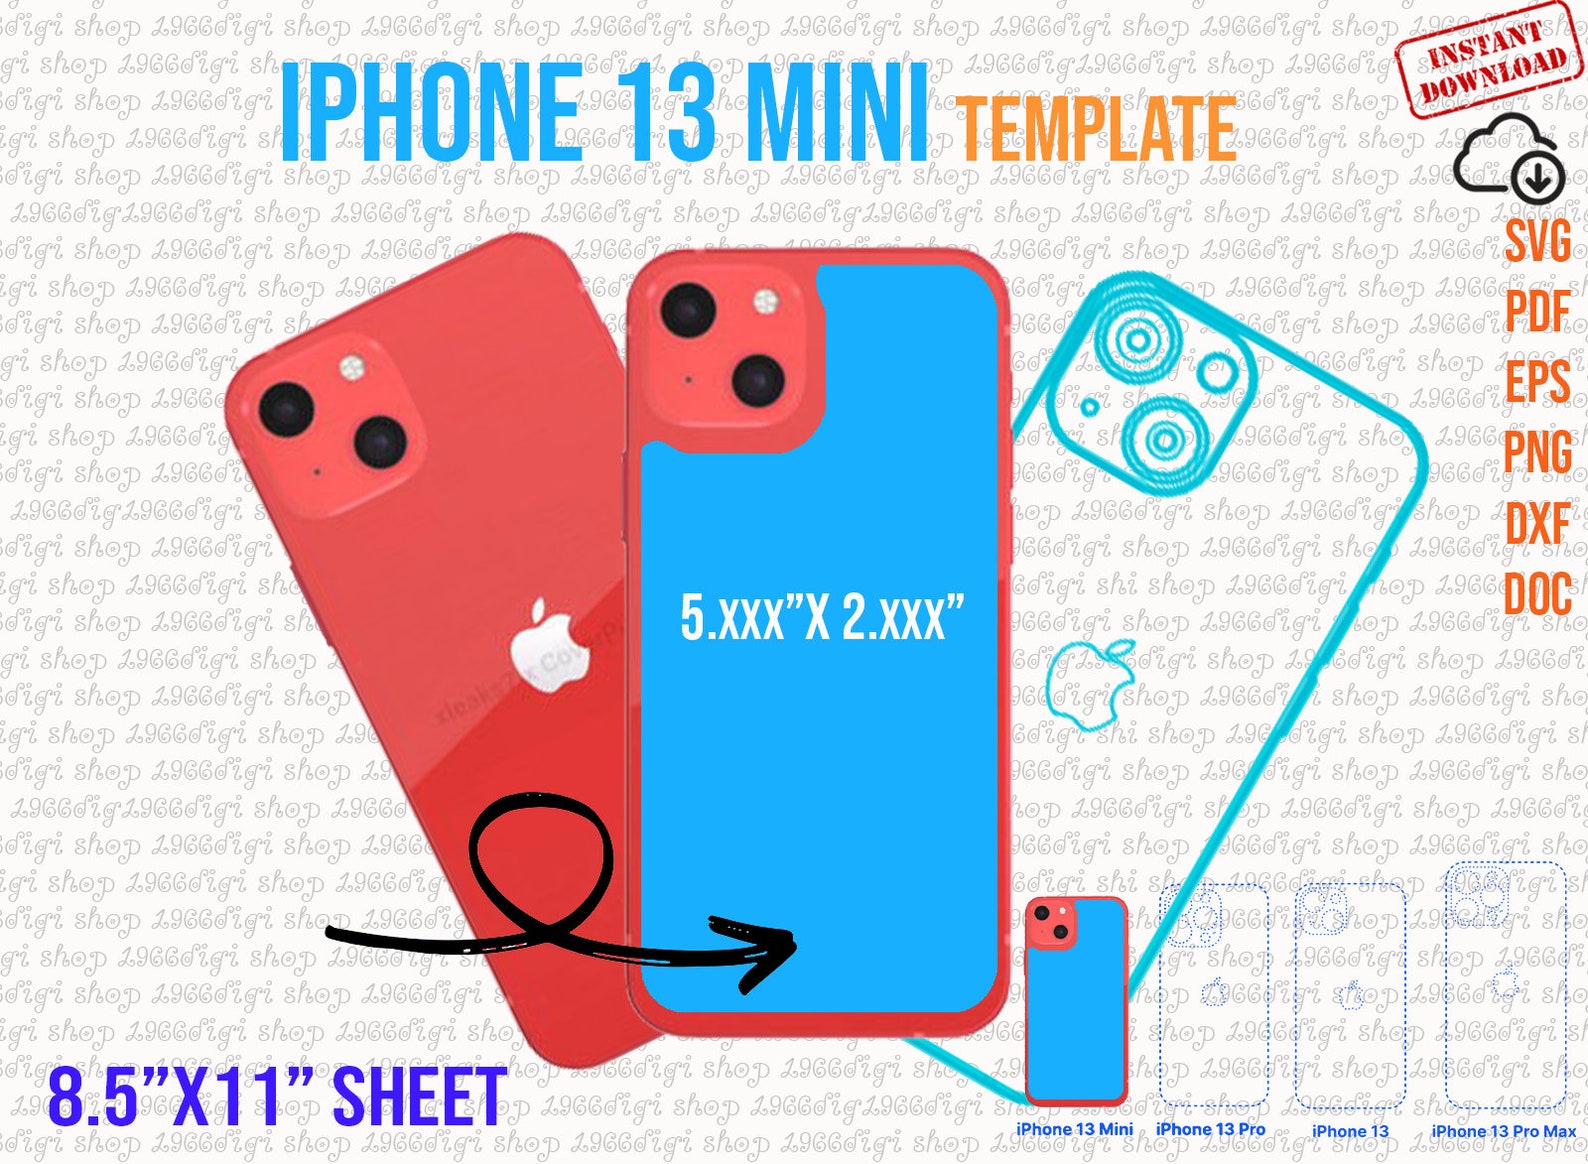 iphone-13-mini-template-iphone-svg-phone-case-template-etsy